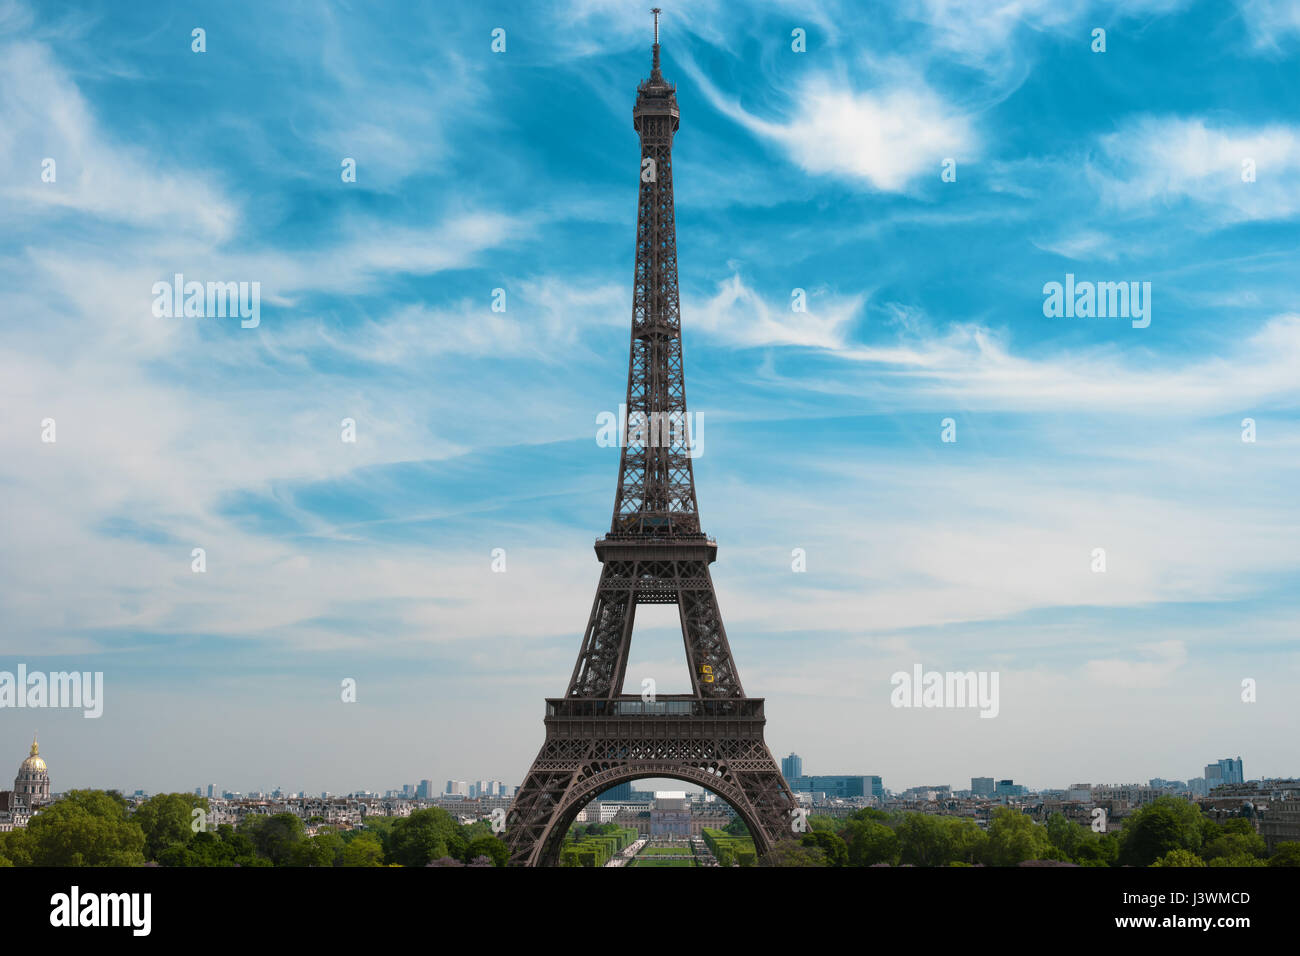 Eiffel Tower and skyline of Paris, France, Europe. Famous monument, most visited place, symbol of Paris. Beautiful european architecture Stock Photo